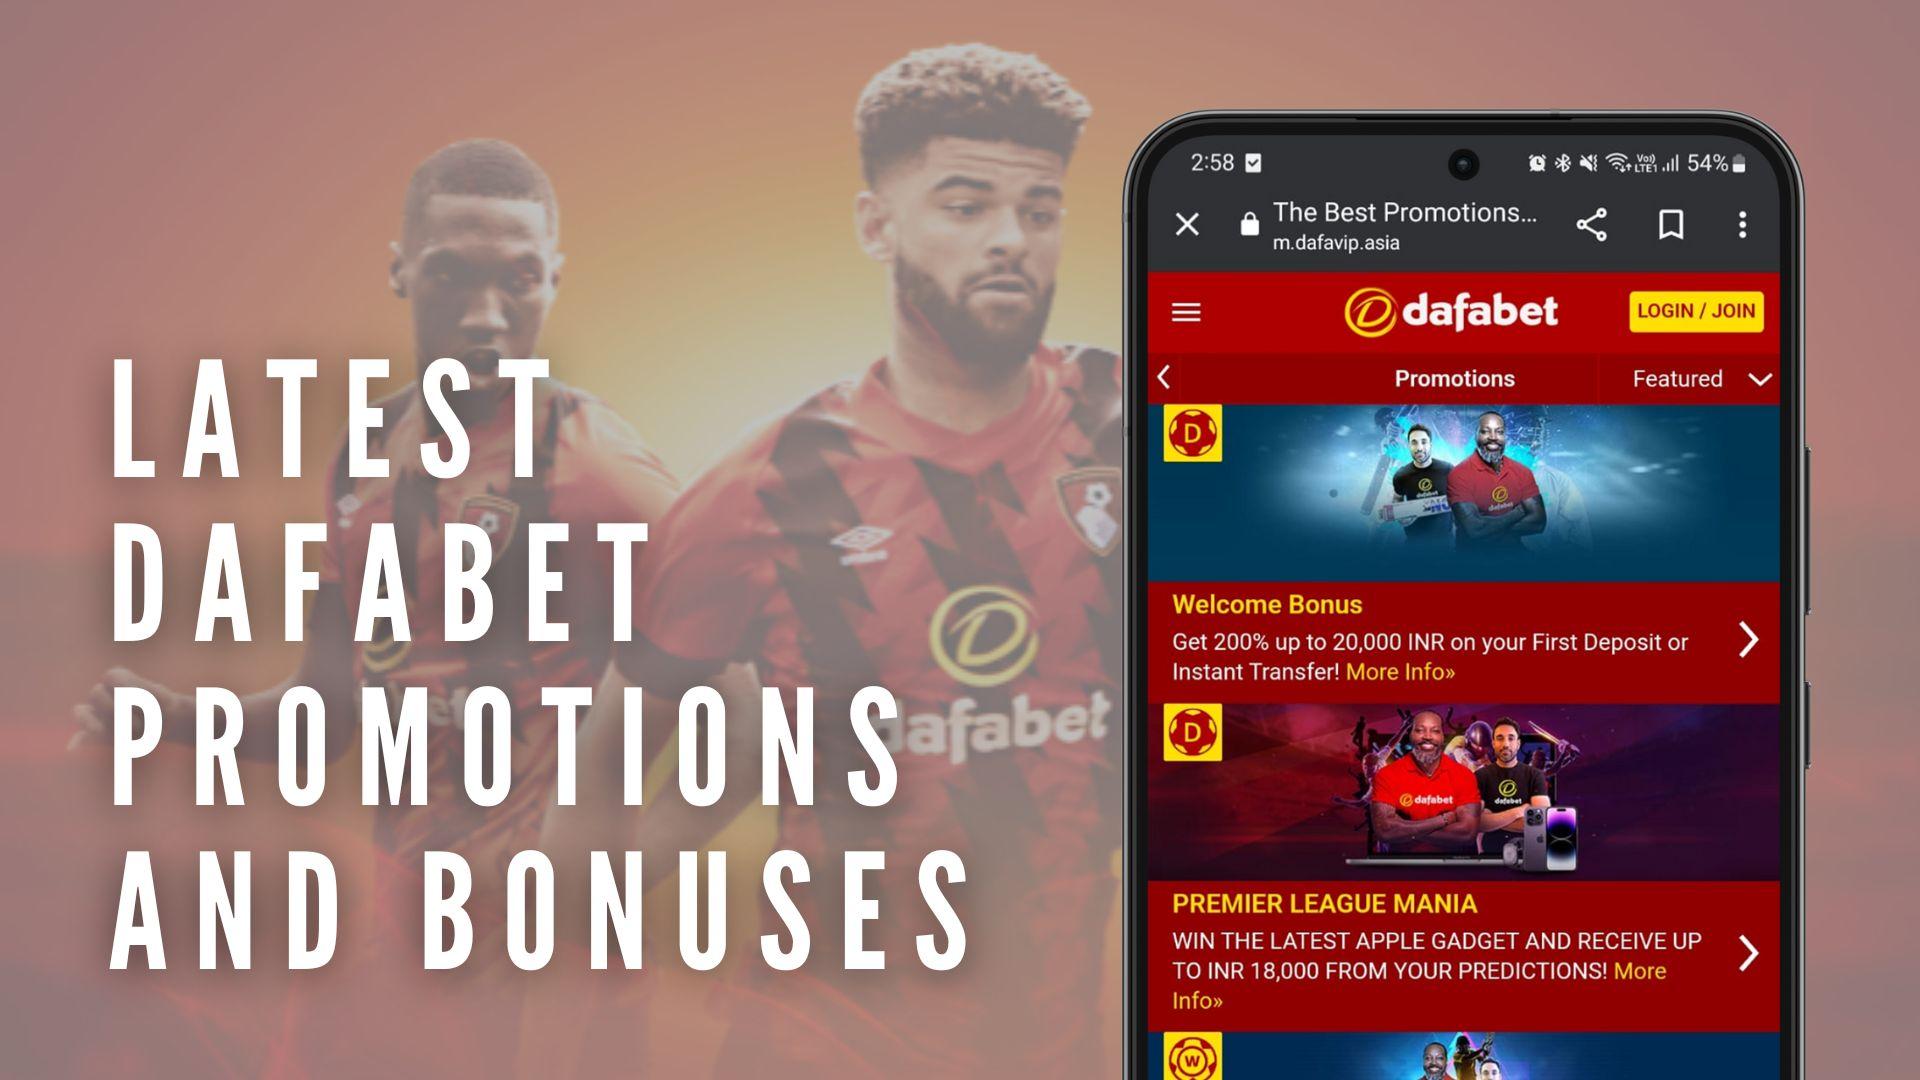 Image with screenshot of Dafabet promotions tab on mobile